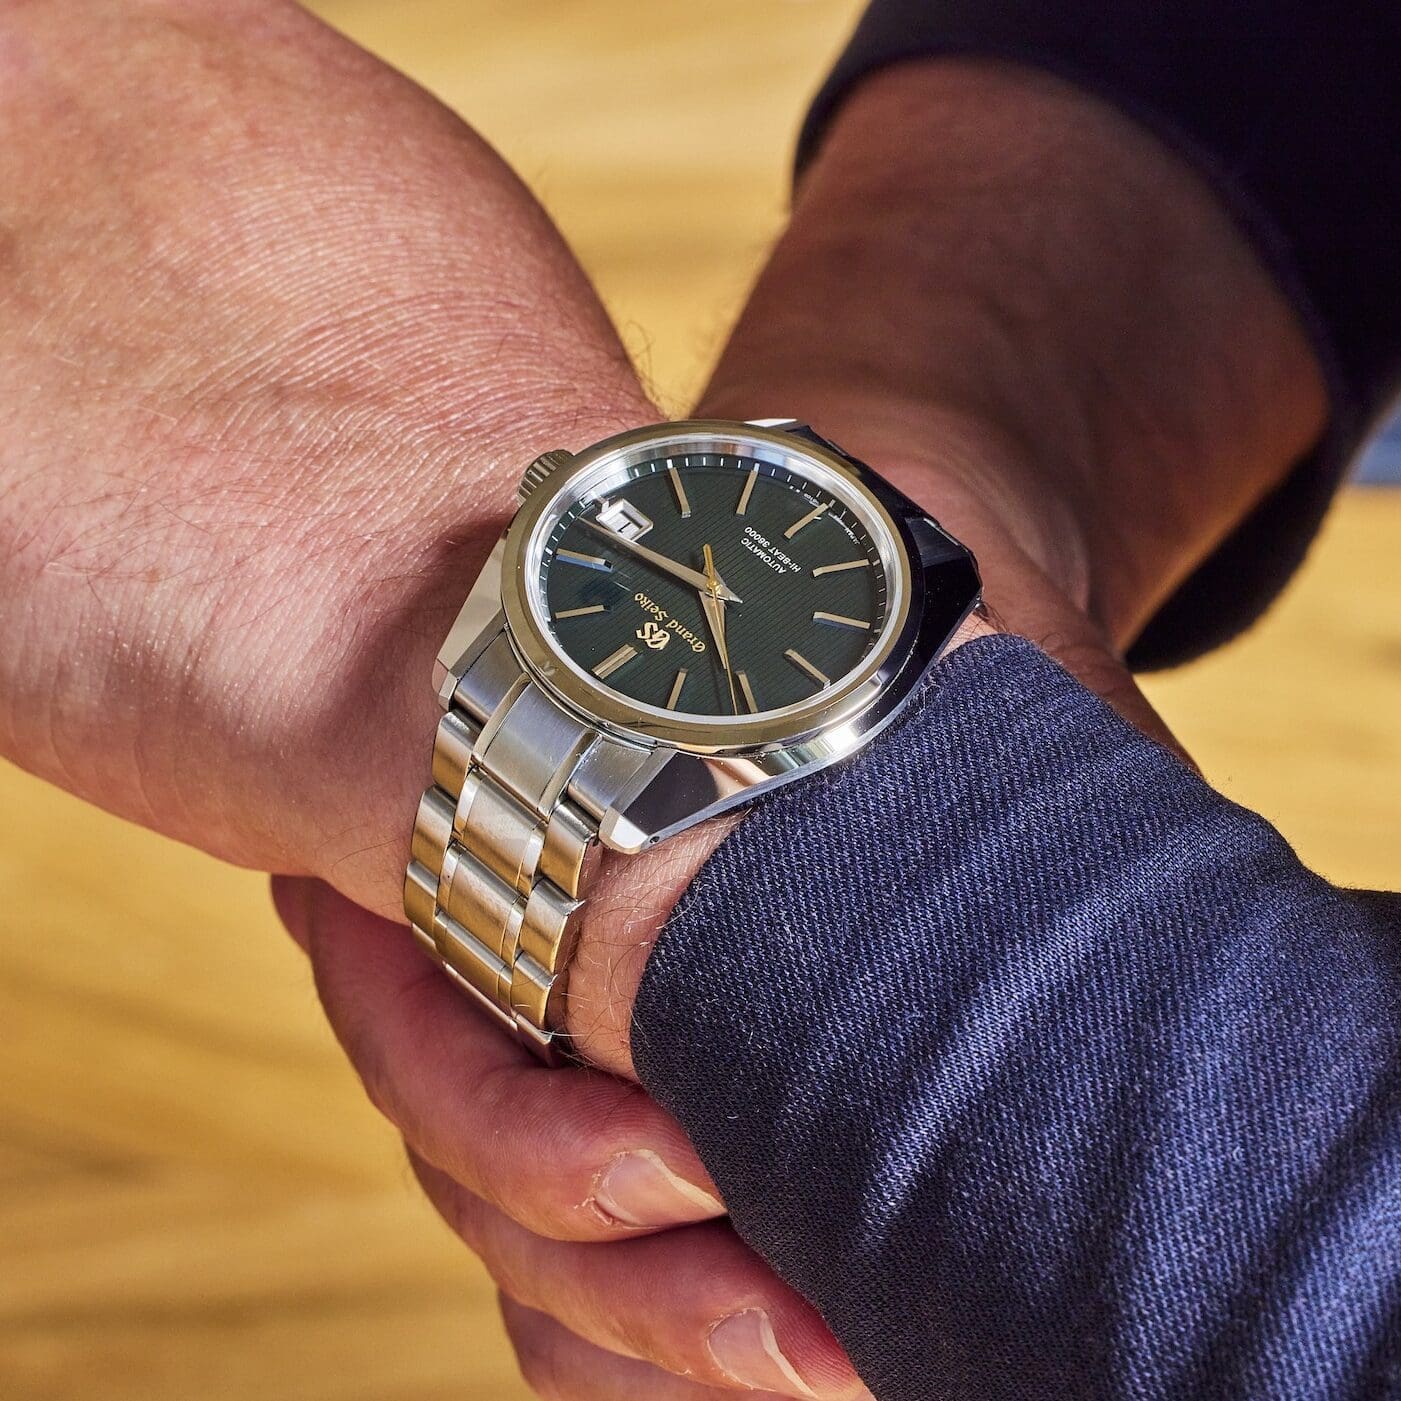 The Grand Seiko SBGH283 you can only buy at their Studio Shizukuishi in Japan